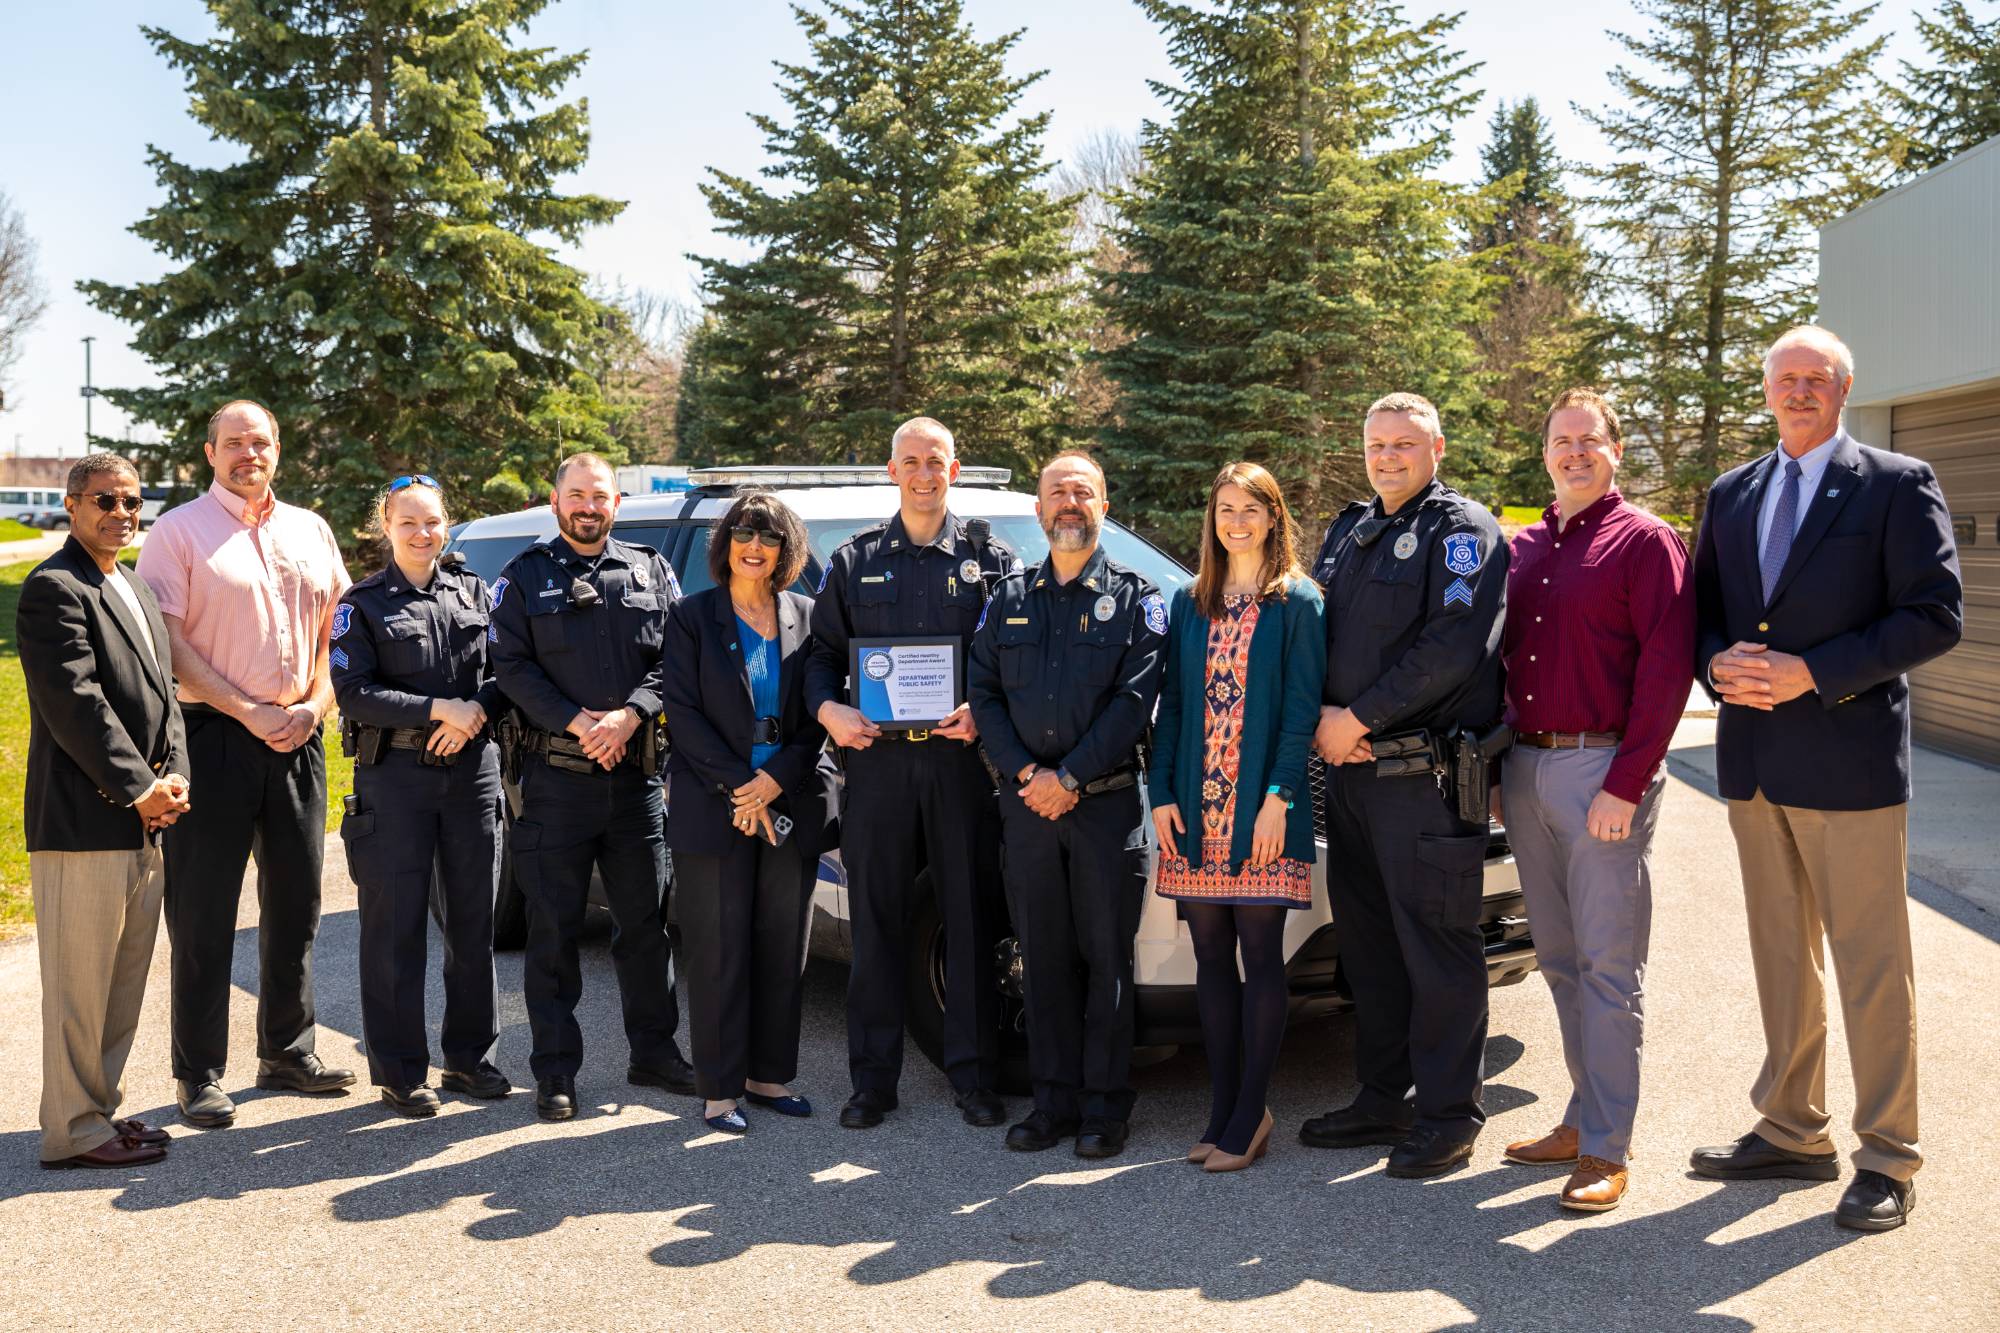 The Department of Public Safety team smiling by a squad car, dressed in uniform, holding a certificate for becoming a Certified Healthy Department